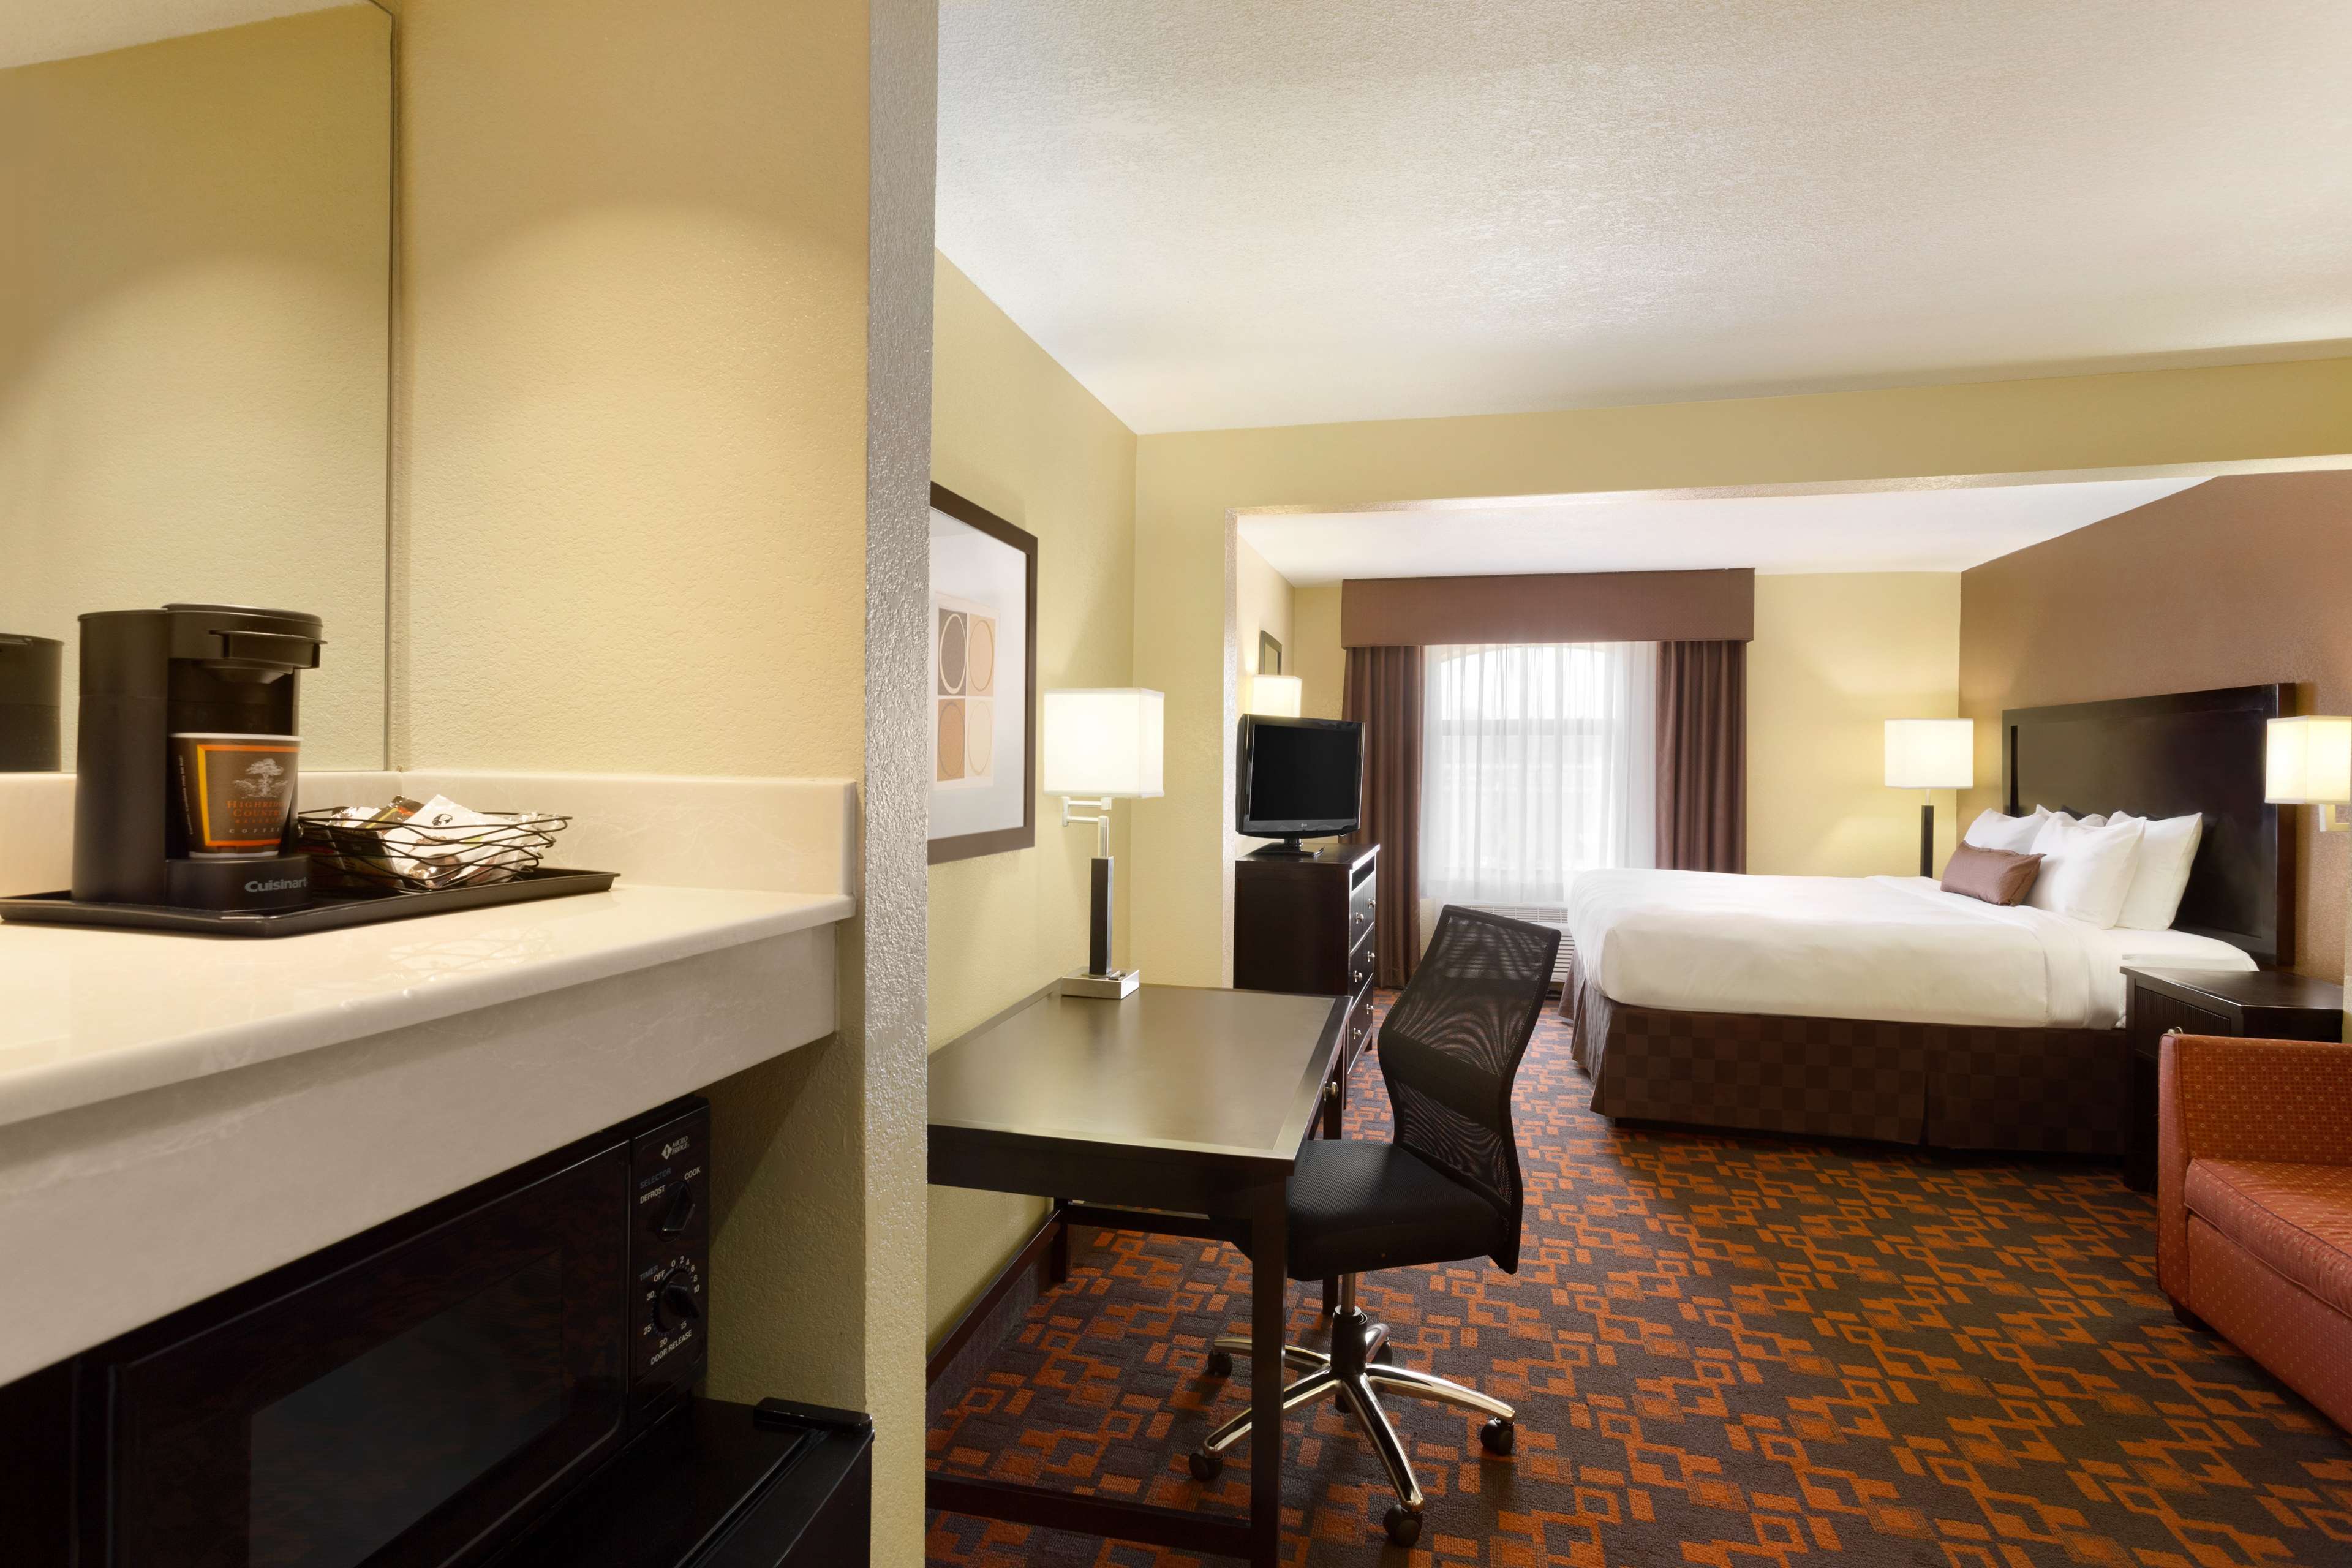 Country Inn & Suites by Radisson, Wolfchase-Memphis, TN Photo